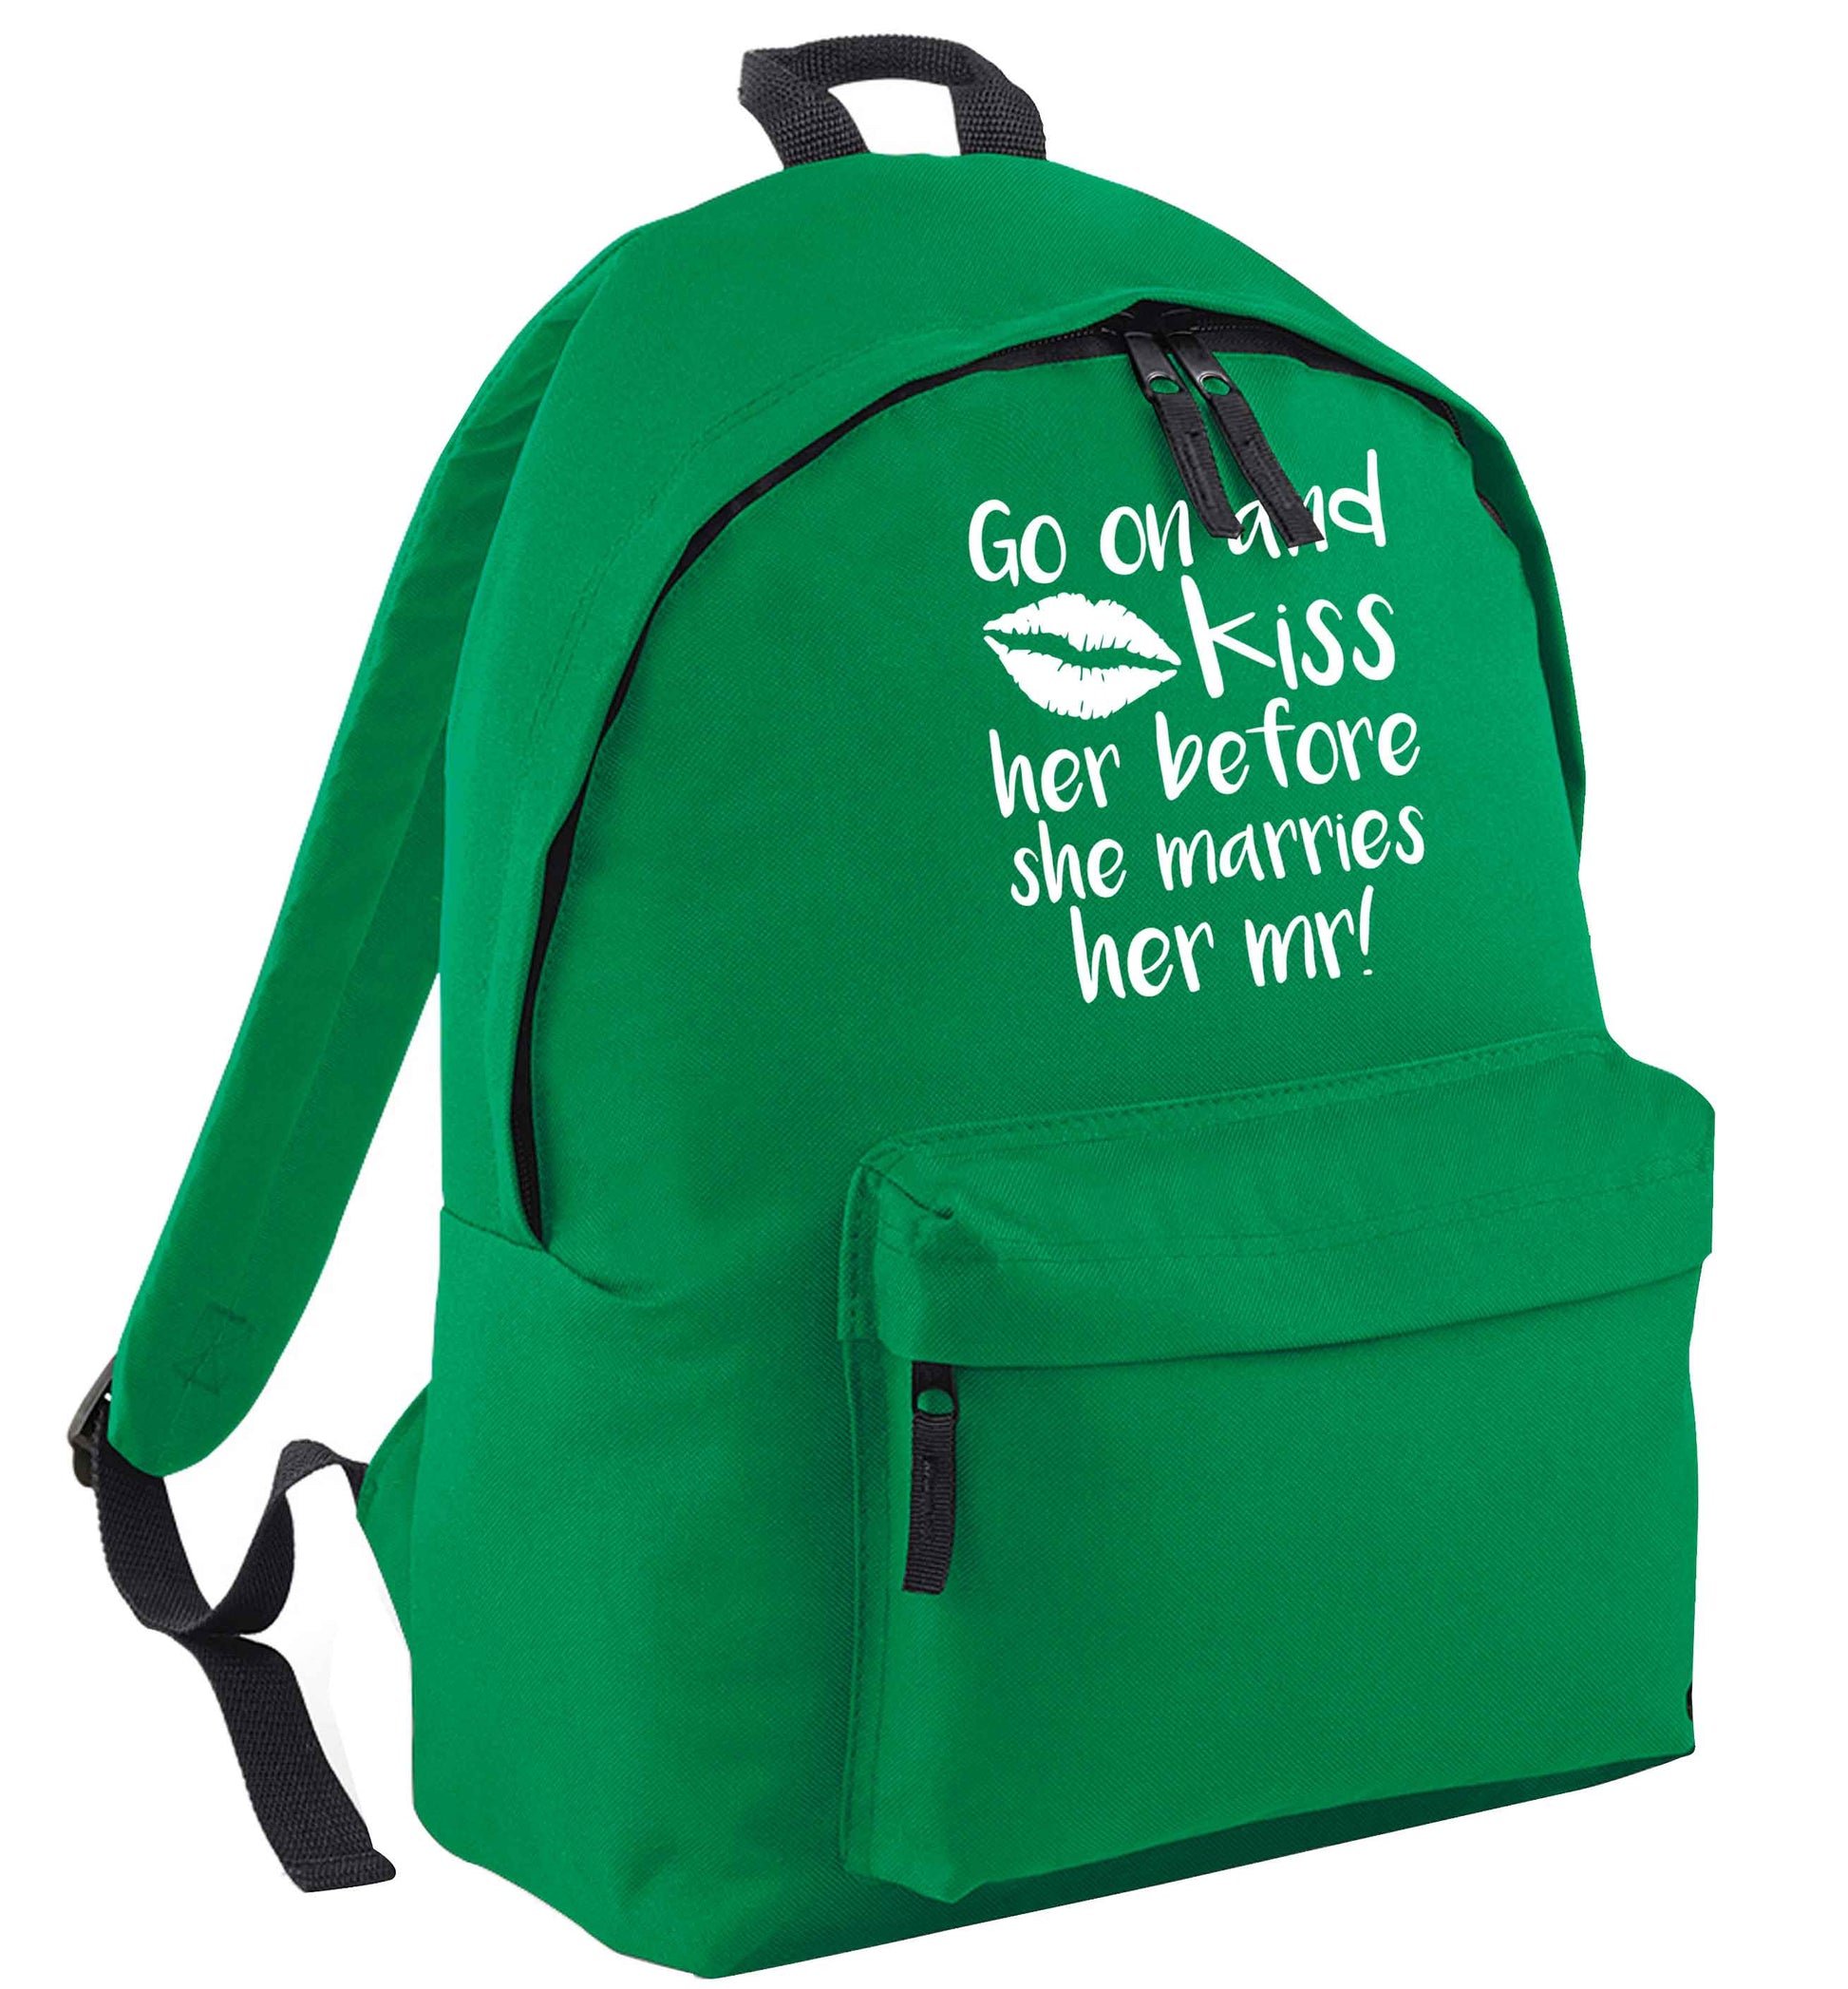 Kiss her before she marries her mr! green adults backpack